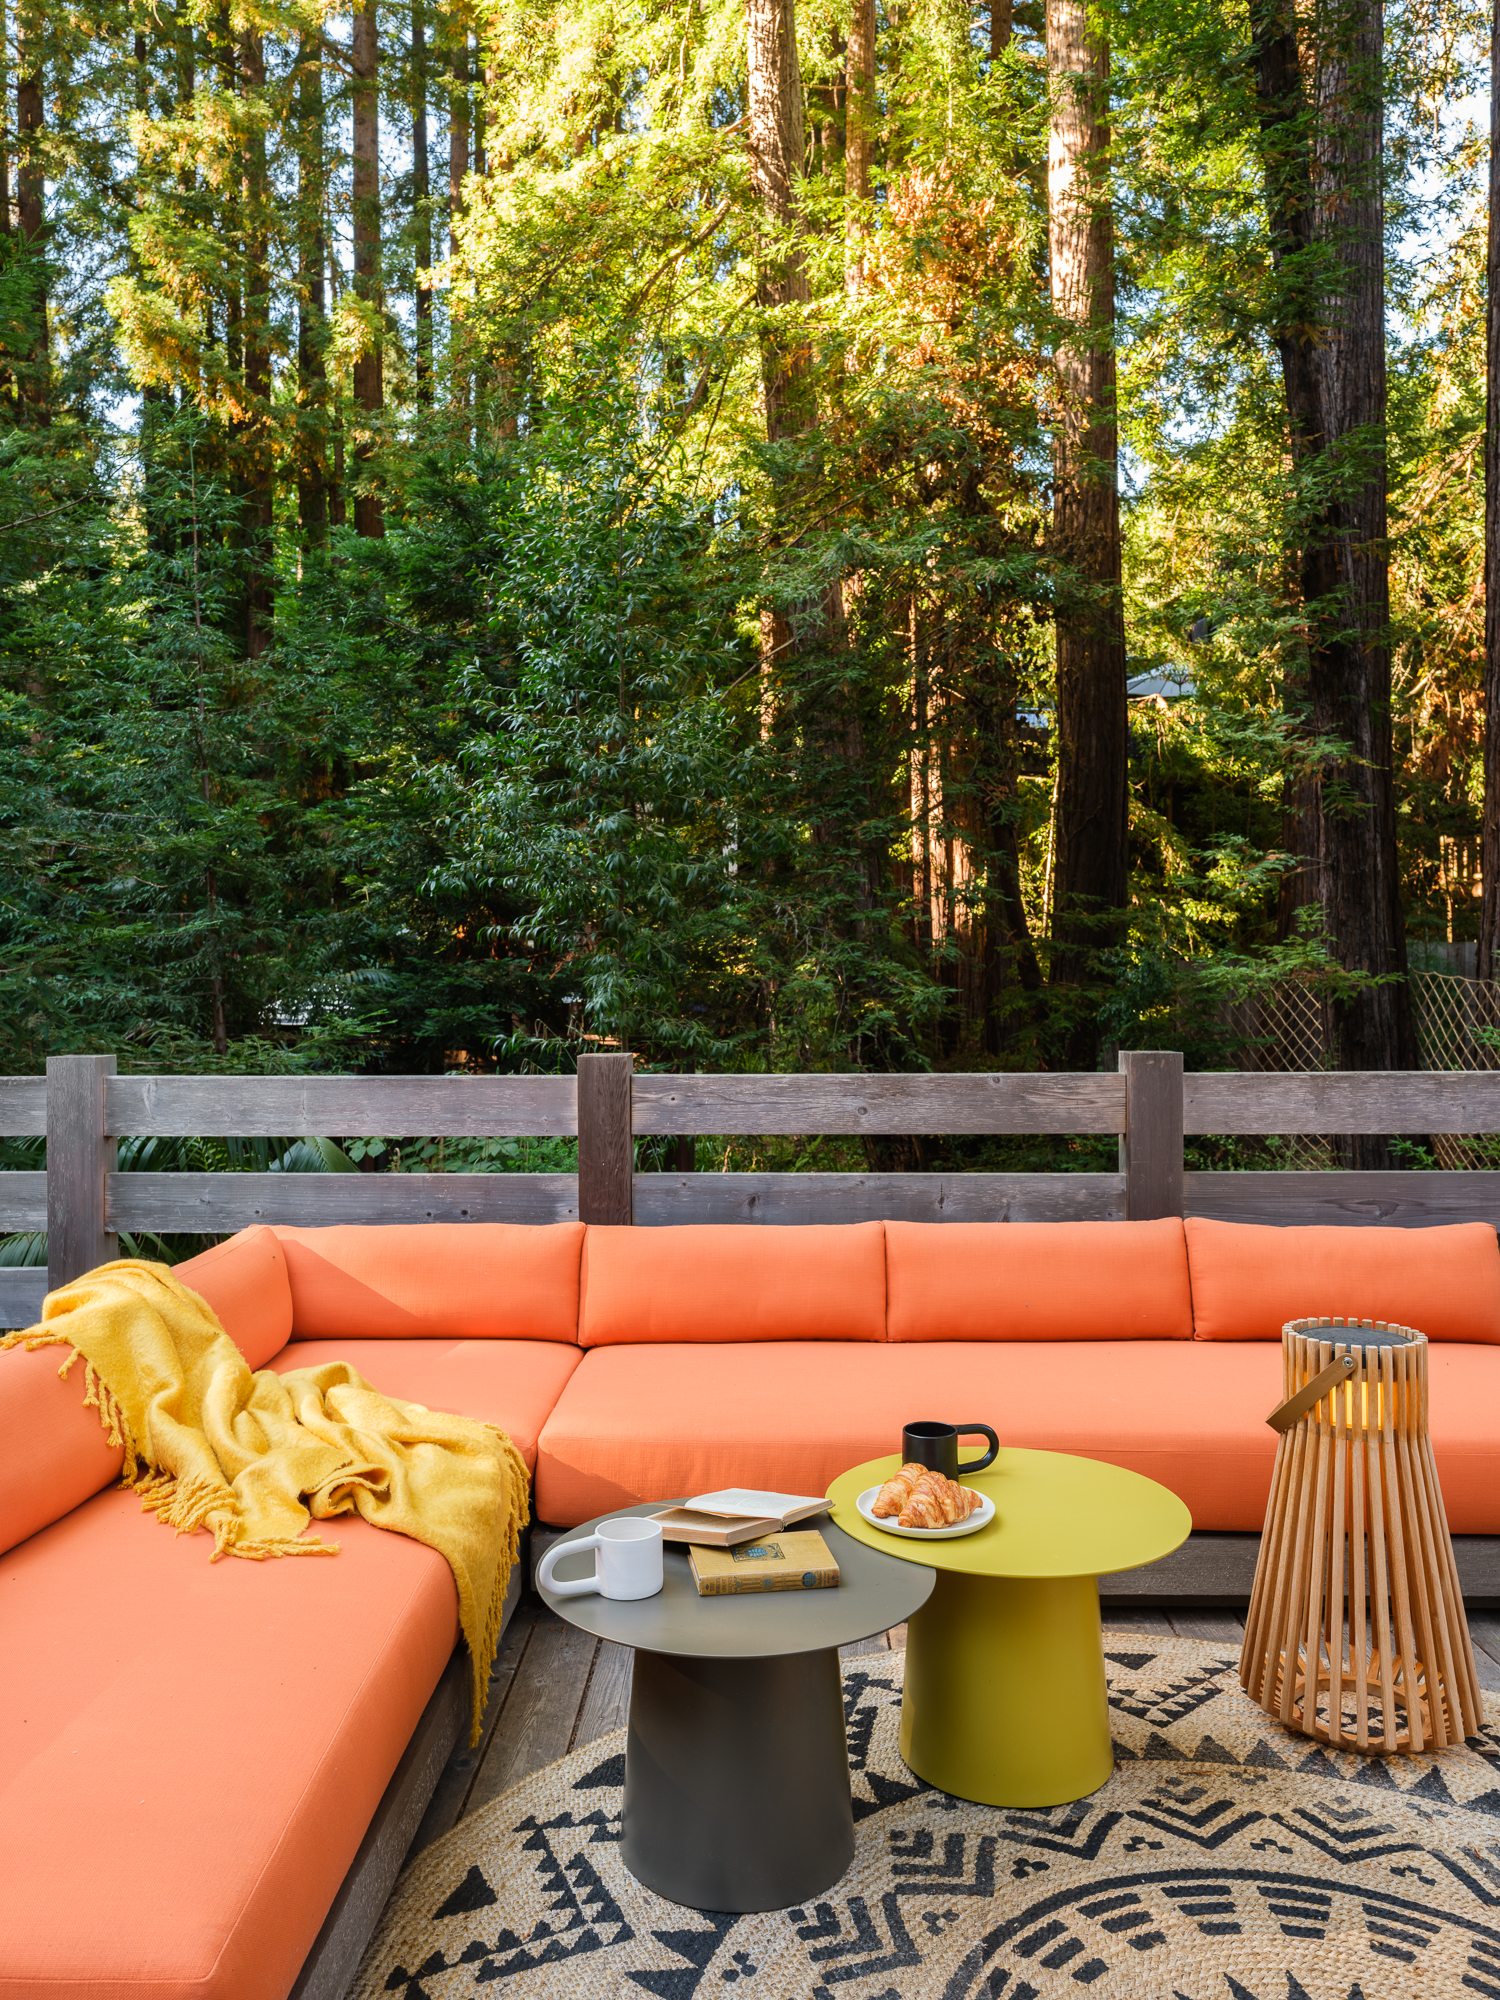 outdoor patio with bright orange sofa and side tables